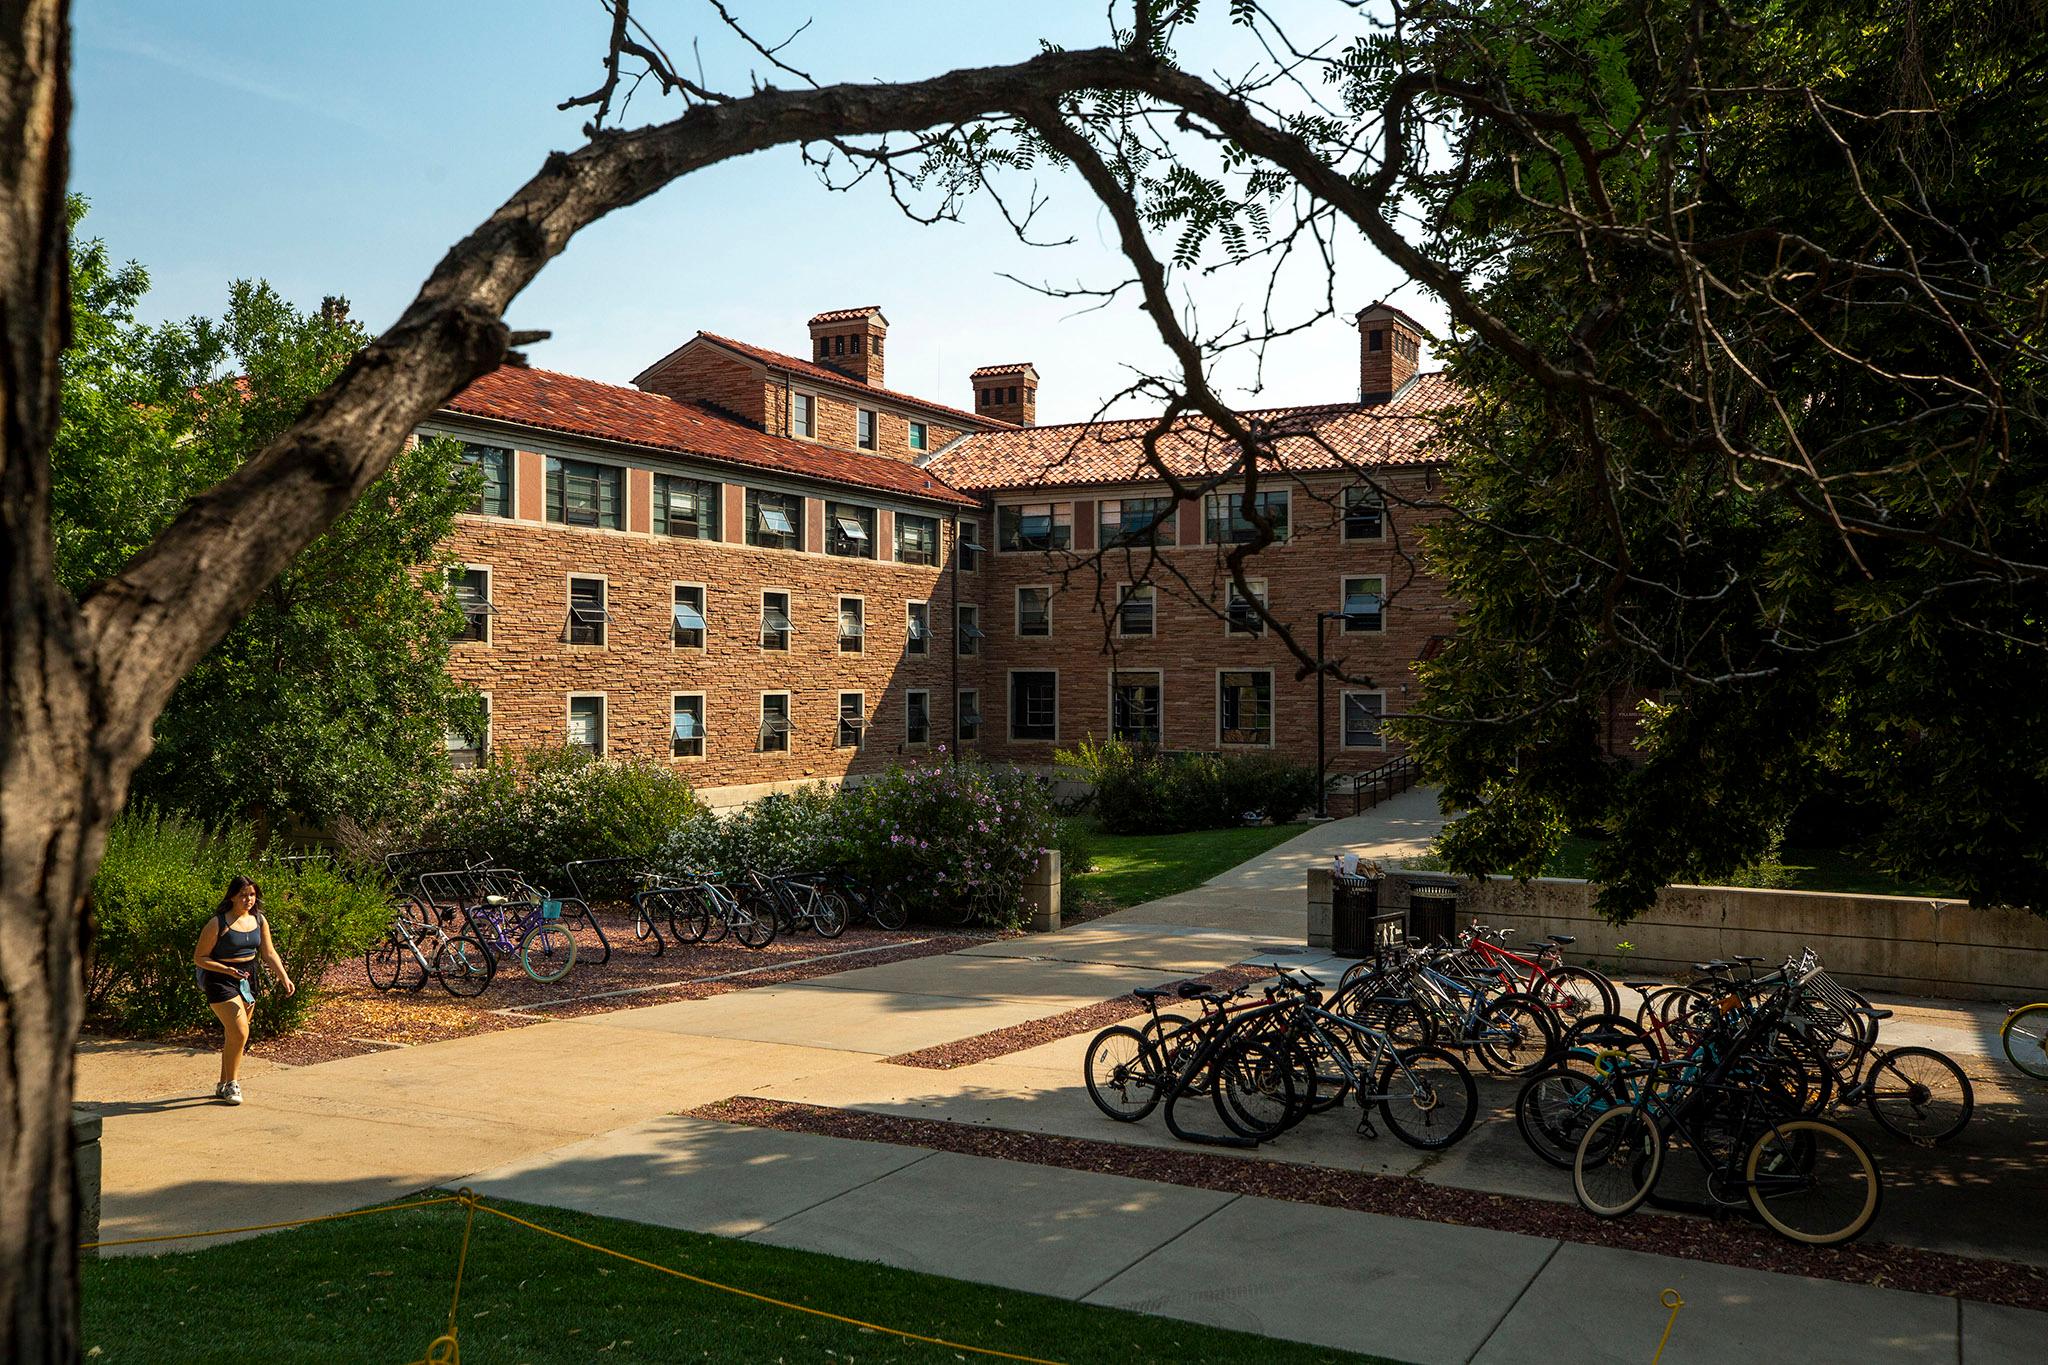 On campus at the University of Colorado Boulder. Sept. 8, 2021.